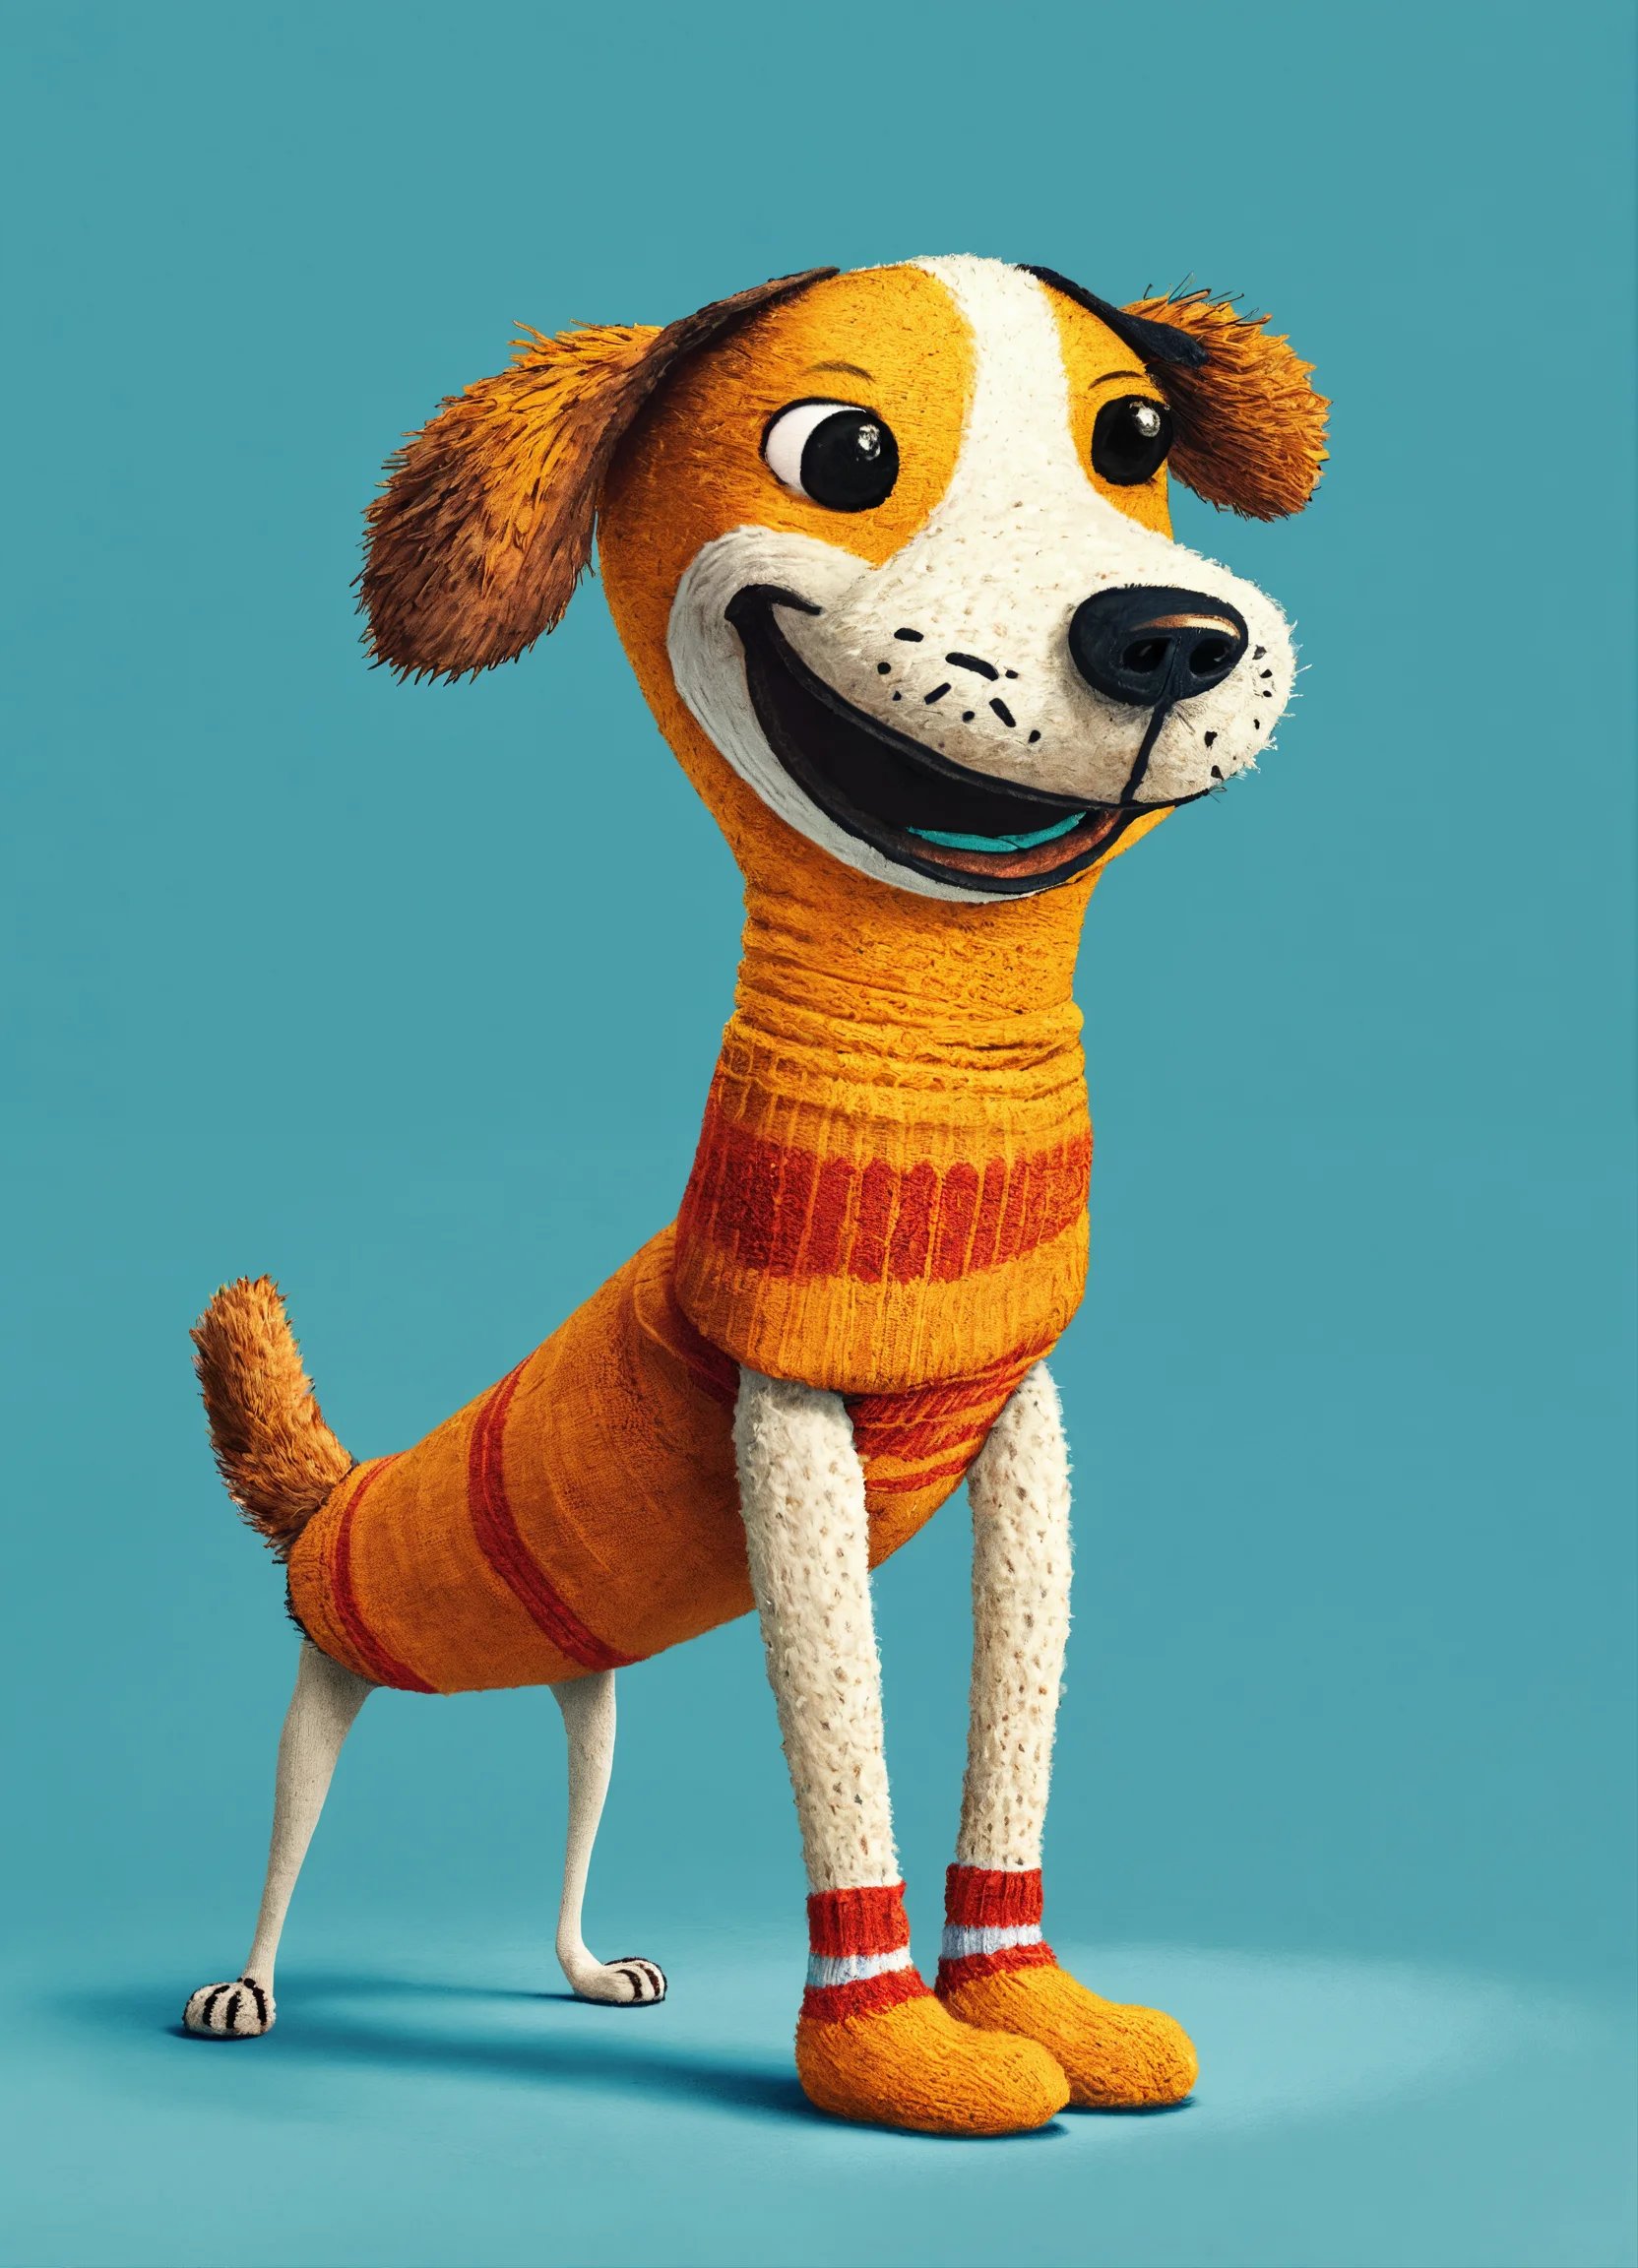 A leg wearing a sock in the shape of a smiling dog.jpg